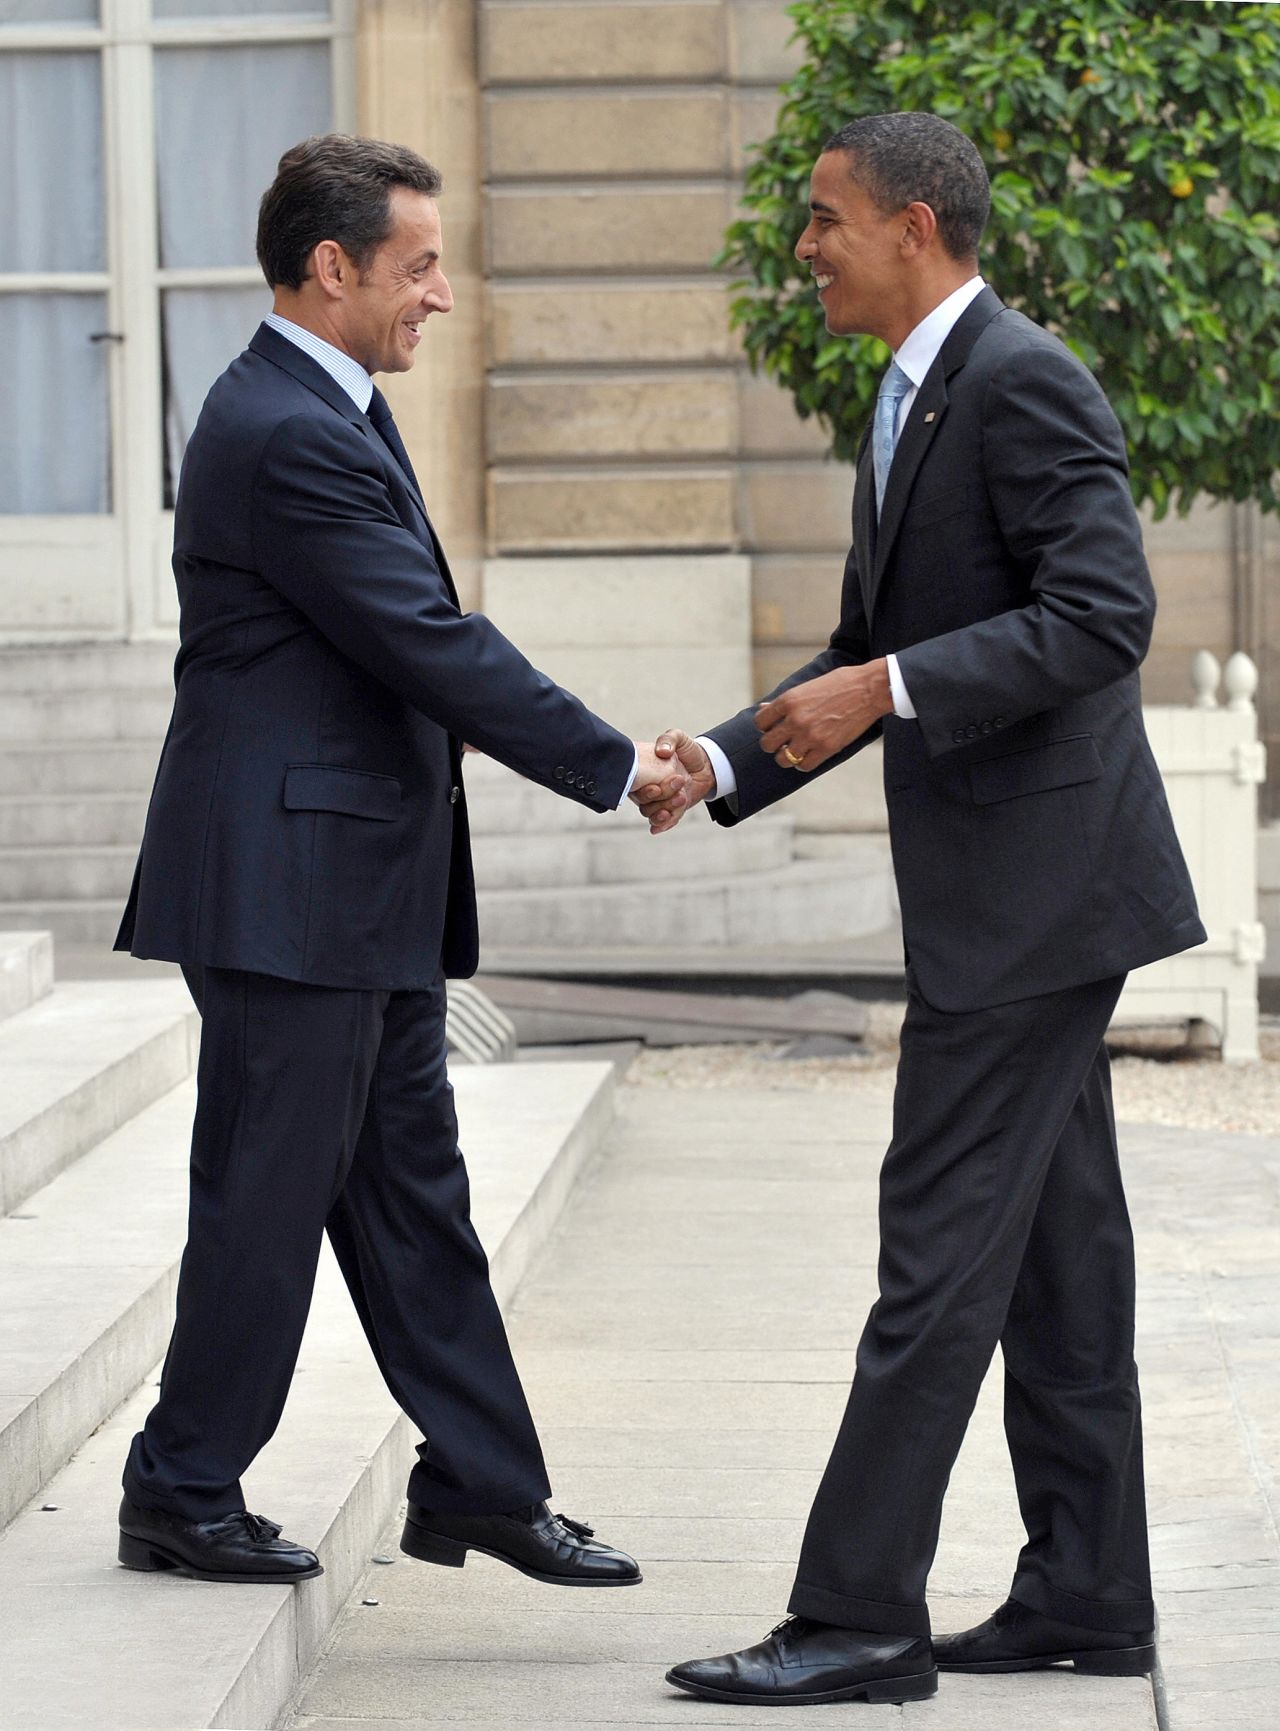 After years of the stuffy Jacques Chirac, the French elected the fresher Sarkozy as president -- but Obama remains a step above, and not only in "coolitude."